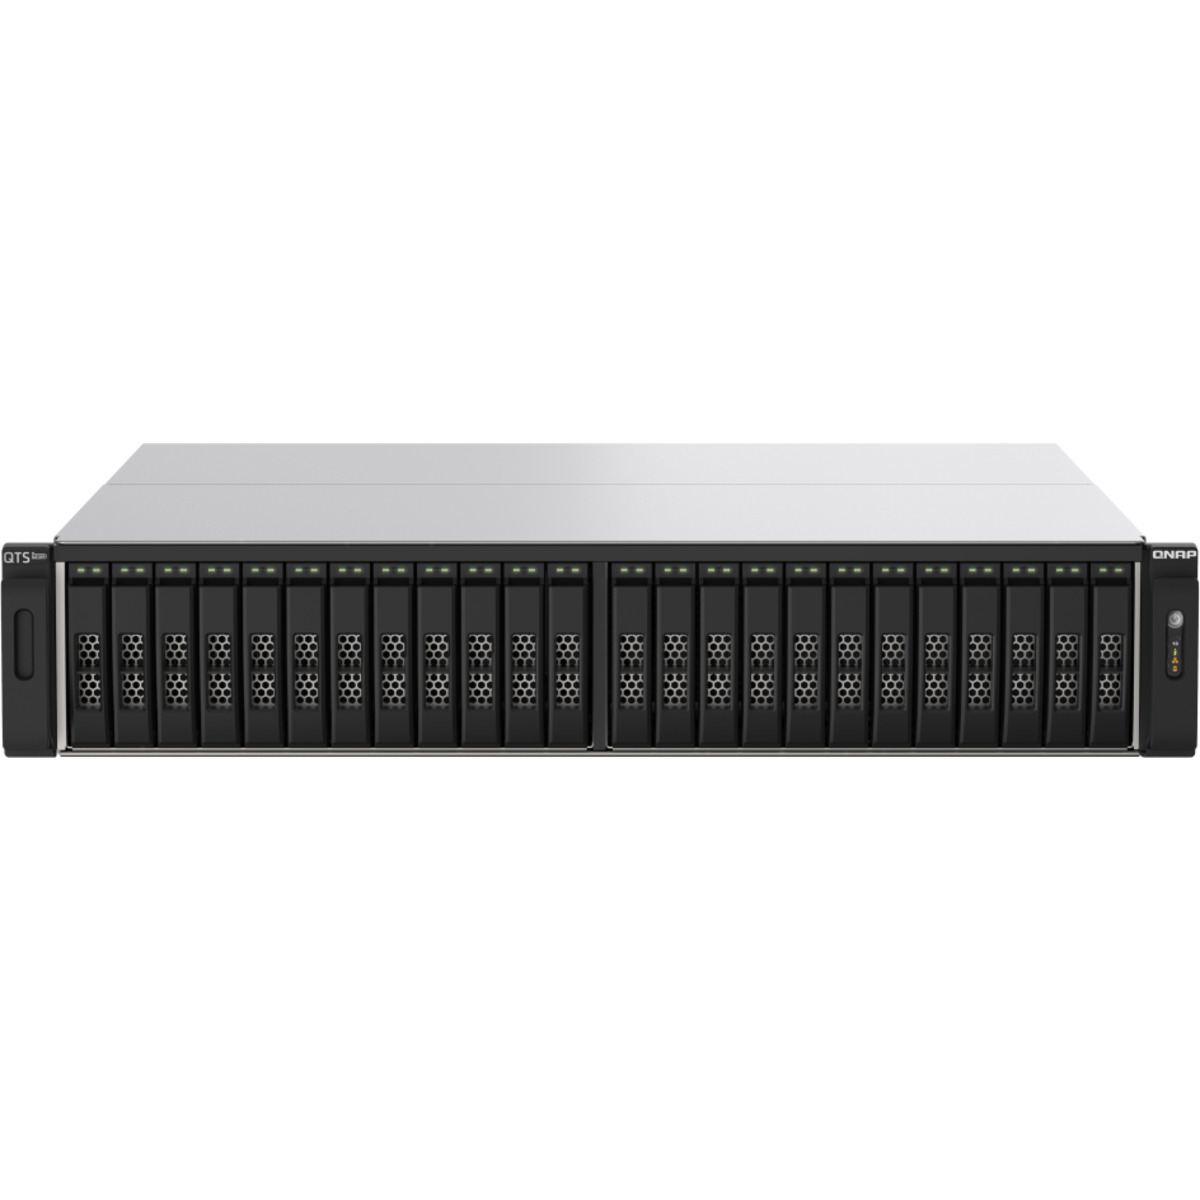 QNAP TS-h2490FU-7232P 48tb 24-Bay RackMount Large Business / Enterprise NAS - Network Attached Storage Device 24x2tb Sandisk Plus Series SDSSDA3N-2T00  3200/3000MB/s M.2 2280 NVMe SSD CONSUMER Class Drives Installed - Burn-In Tested TS-h2490FU-7232P